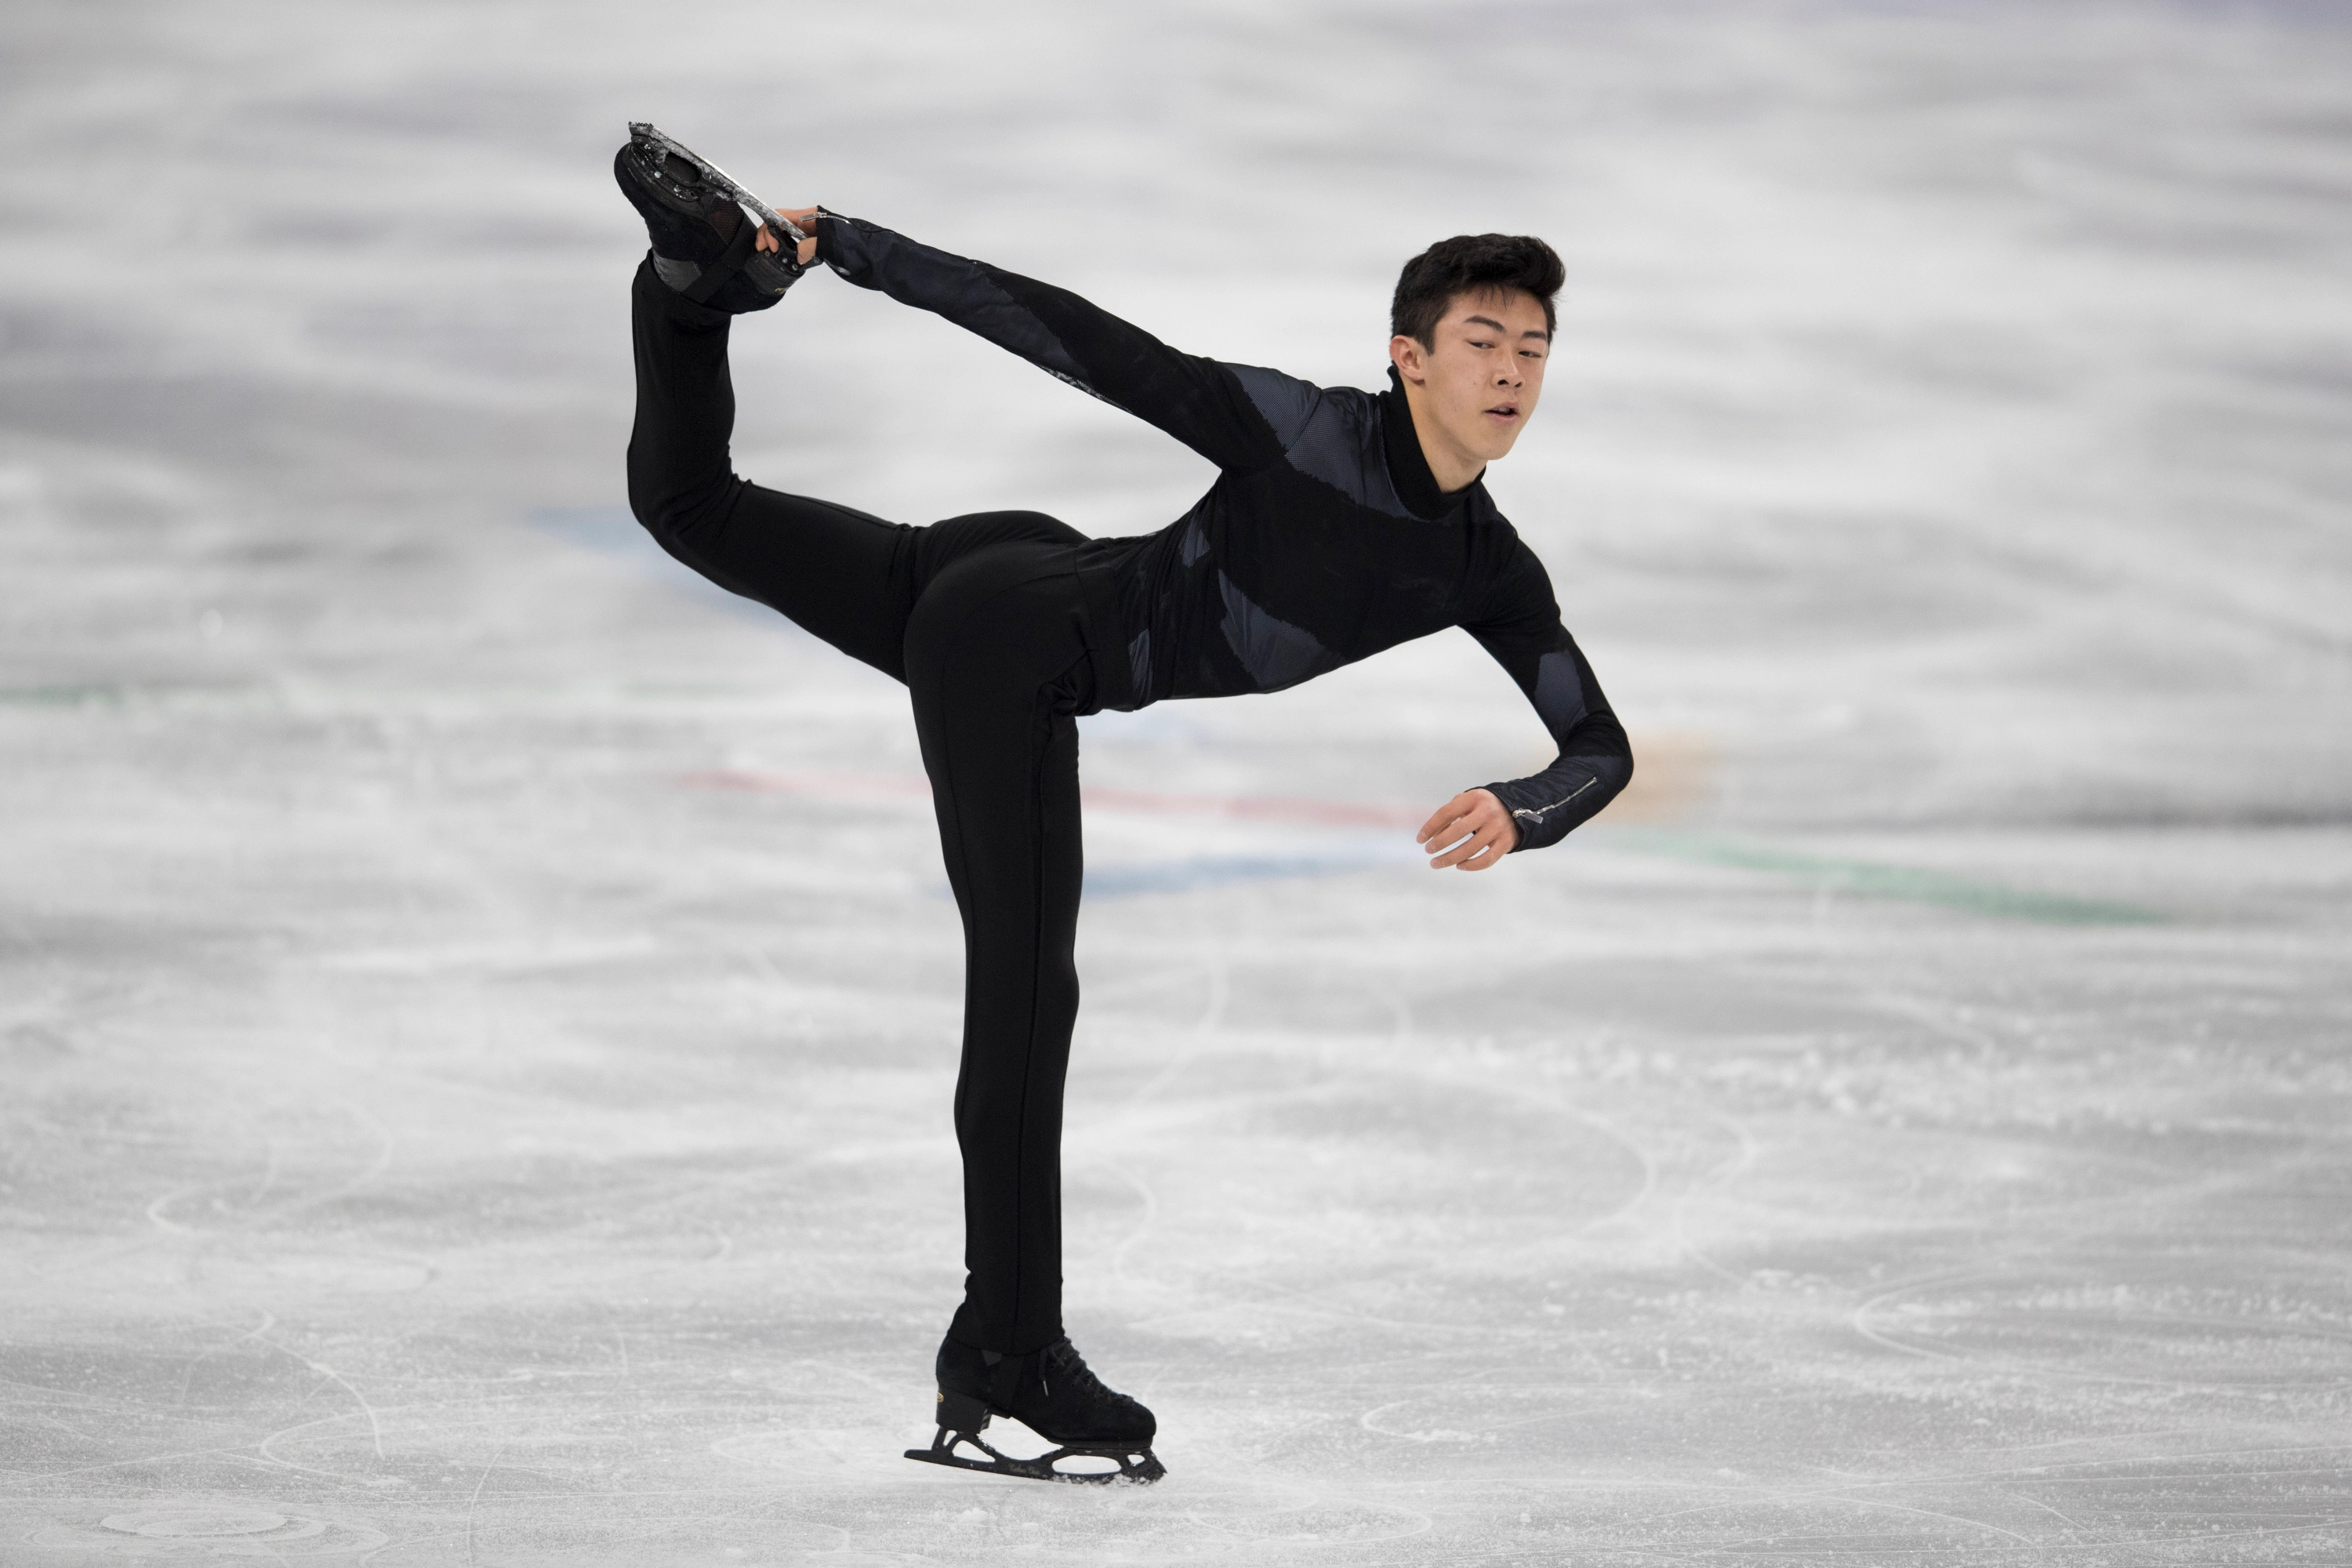 Single Skating: Nathan Chen of the United States competes in the Team Event Men's Short Program, The PyeongChang 2018. 3000x2000 HD Wallpaper.